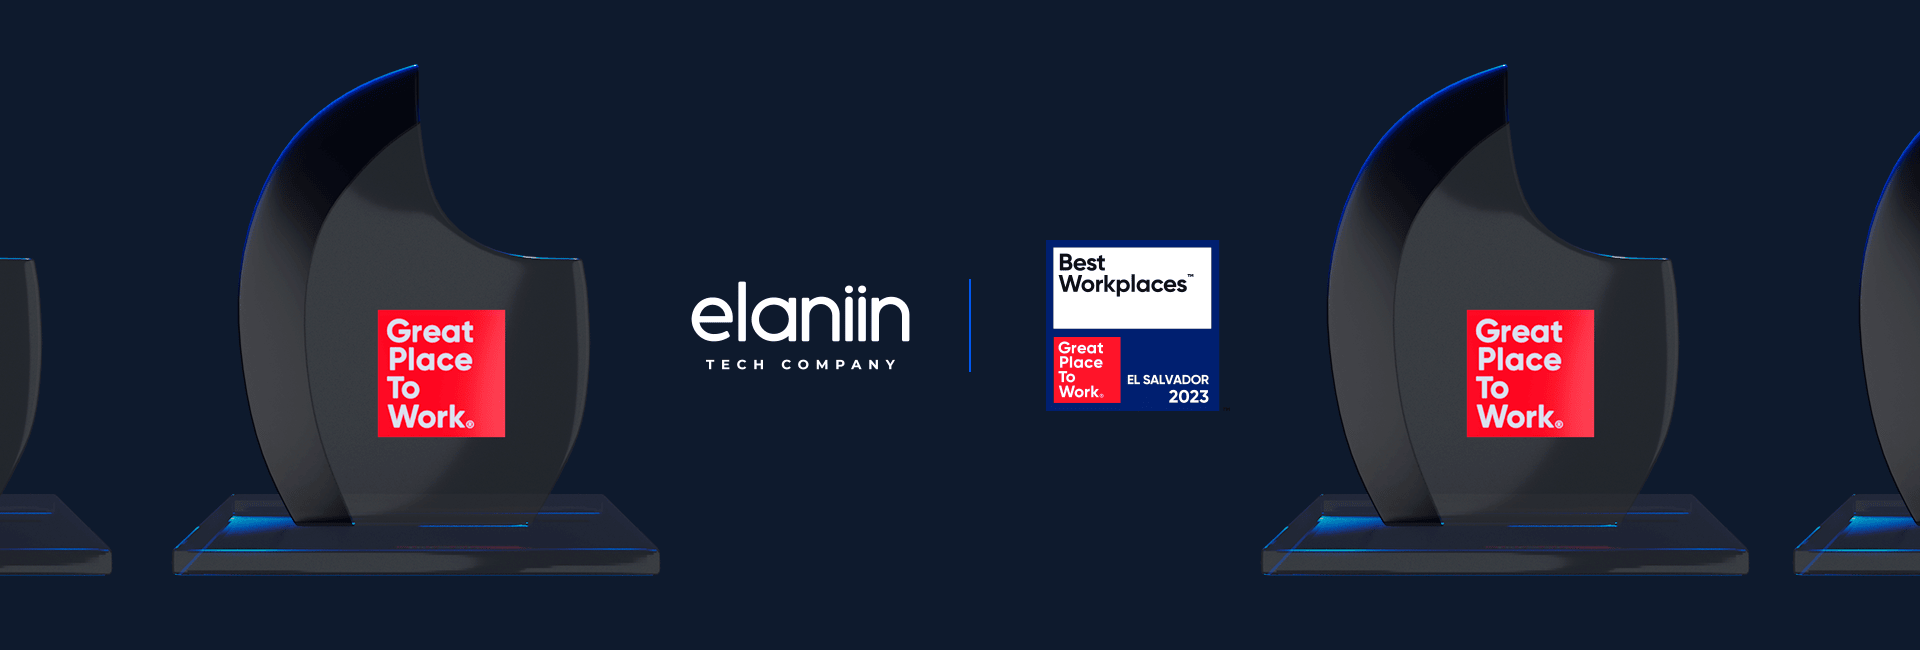 From Great to Greatest: Elaniin is recognized as the #2 Best Workplace in 2023